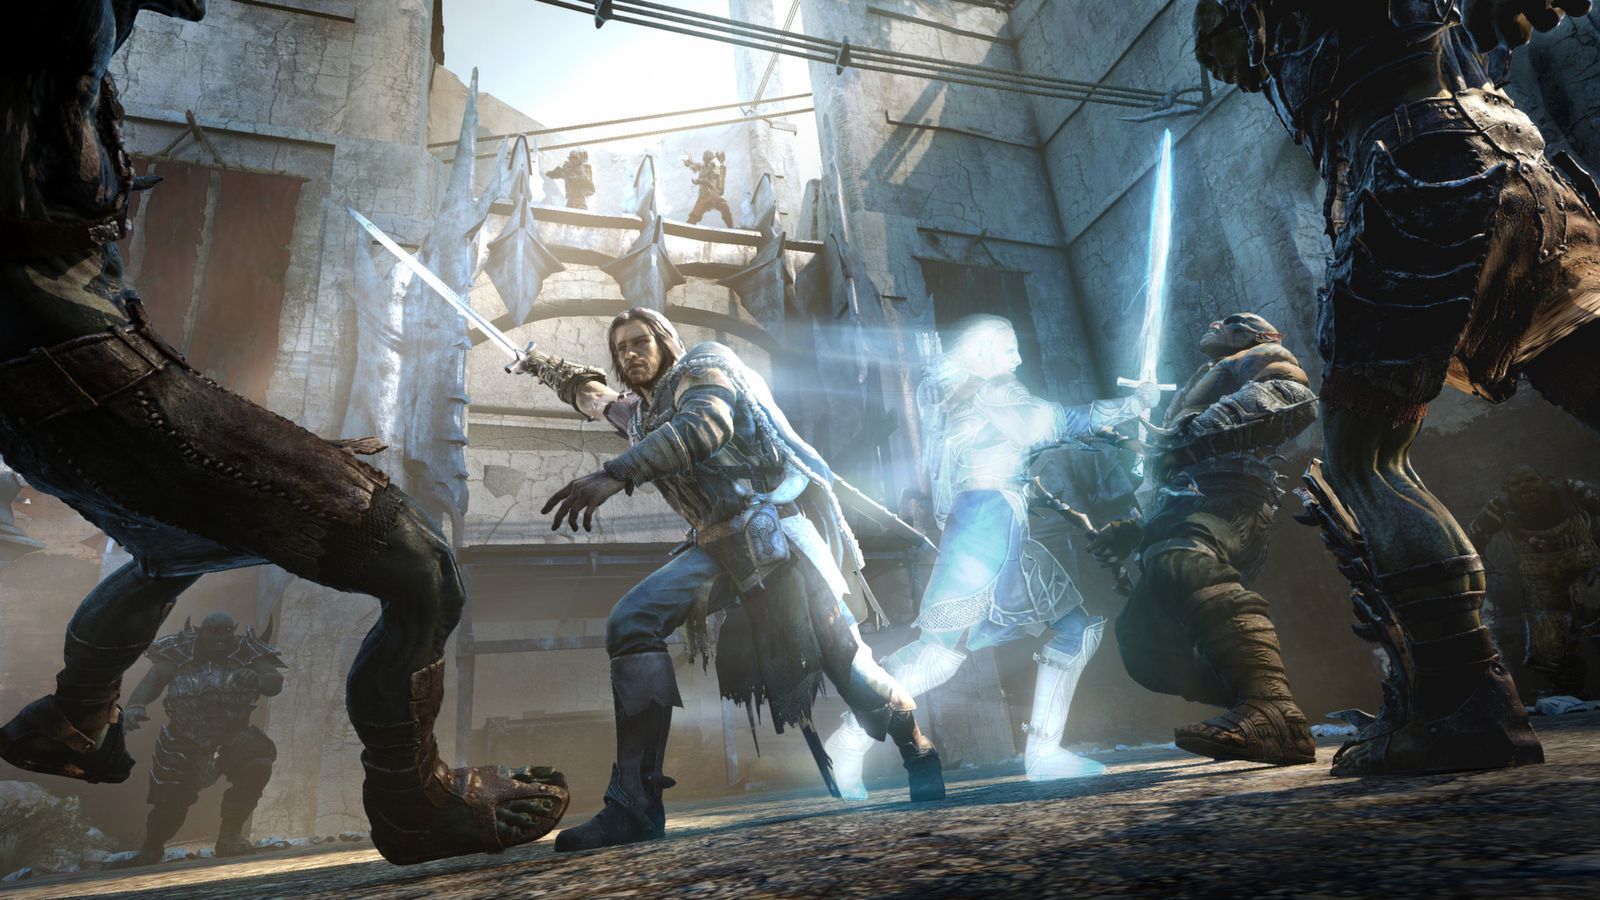 Talion fighting enemies in Middle-earth: Shadow of Mordor.